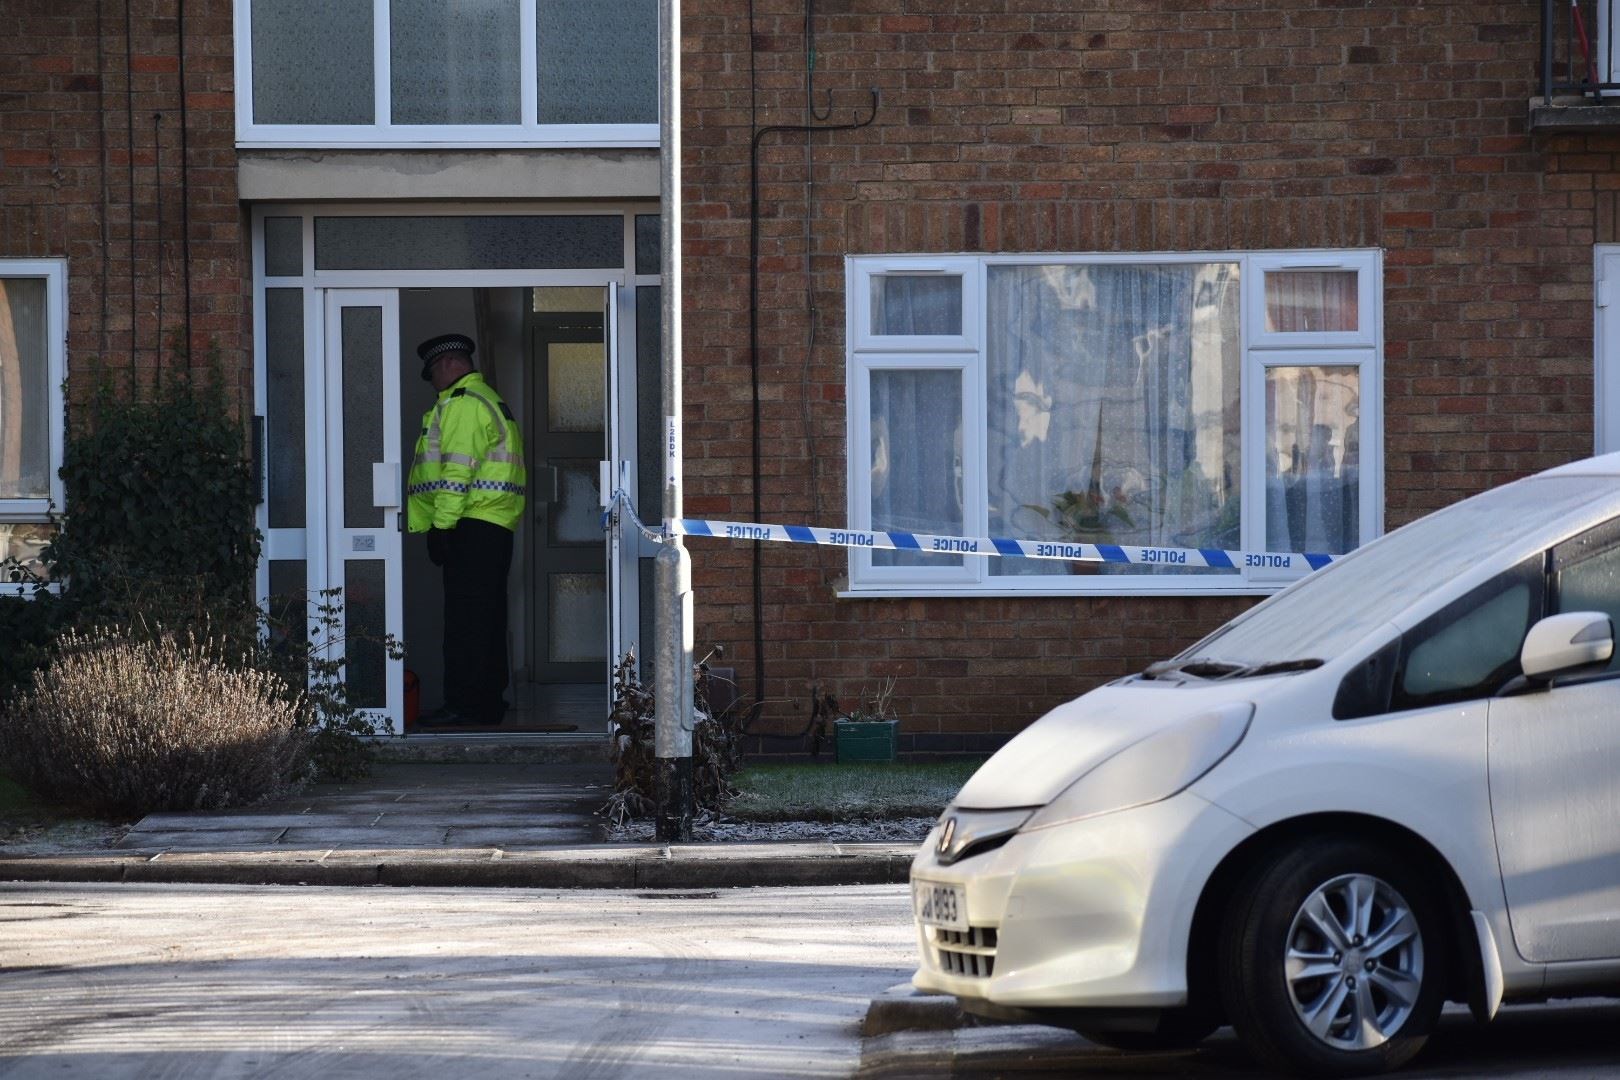 Forensic officers have been seen examining a ground floor flat (Matthew Cooper/PA)